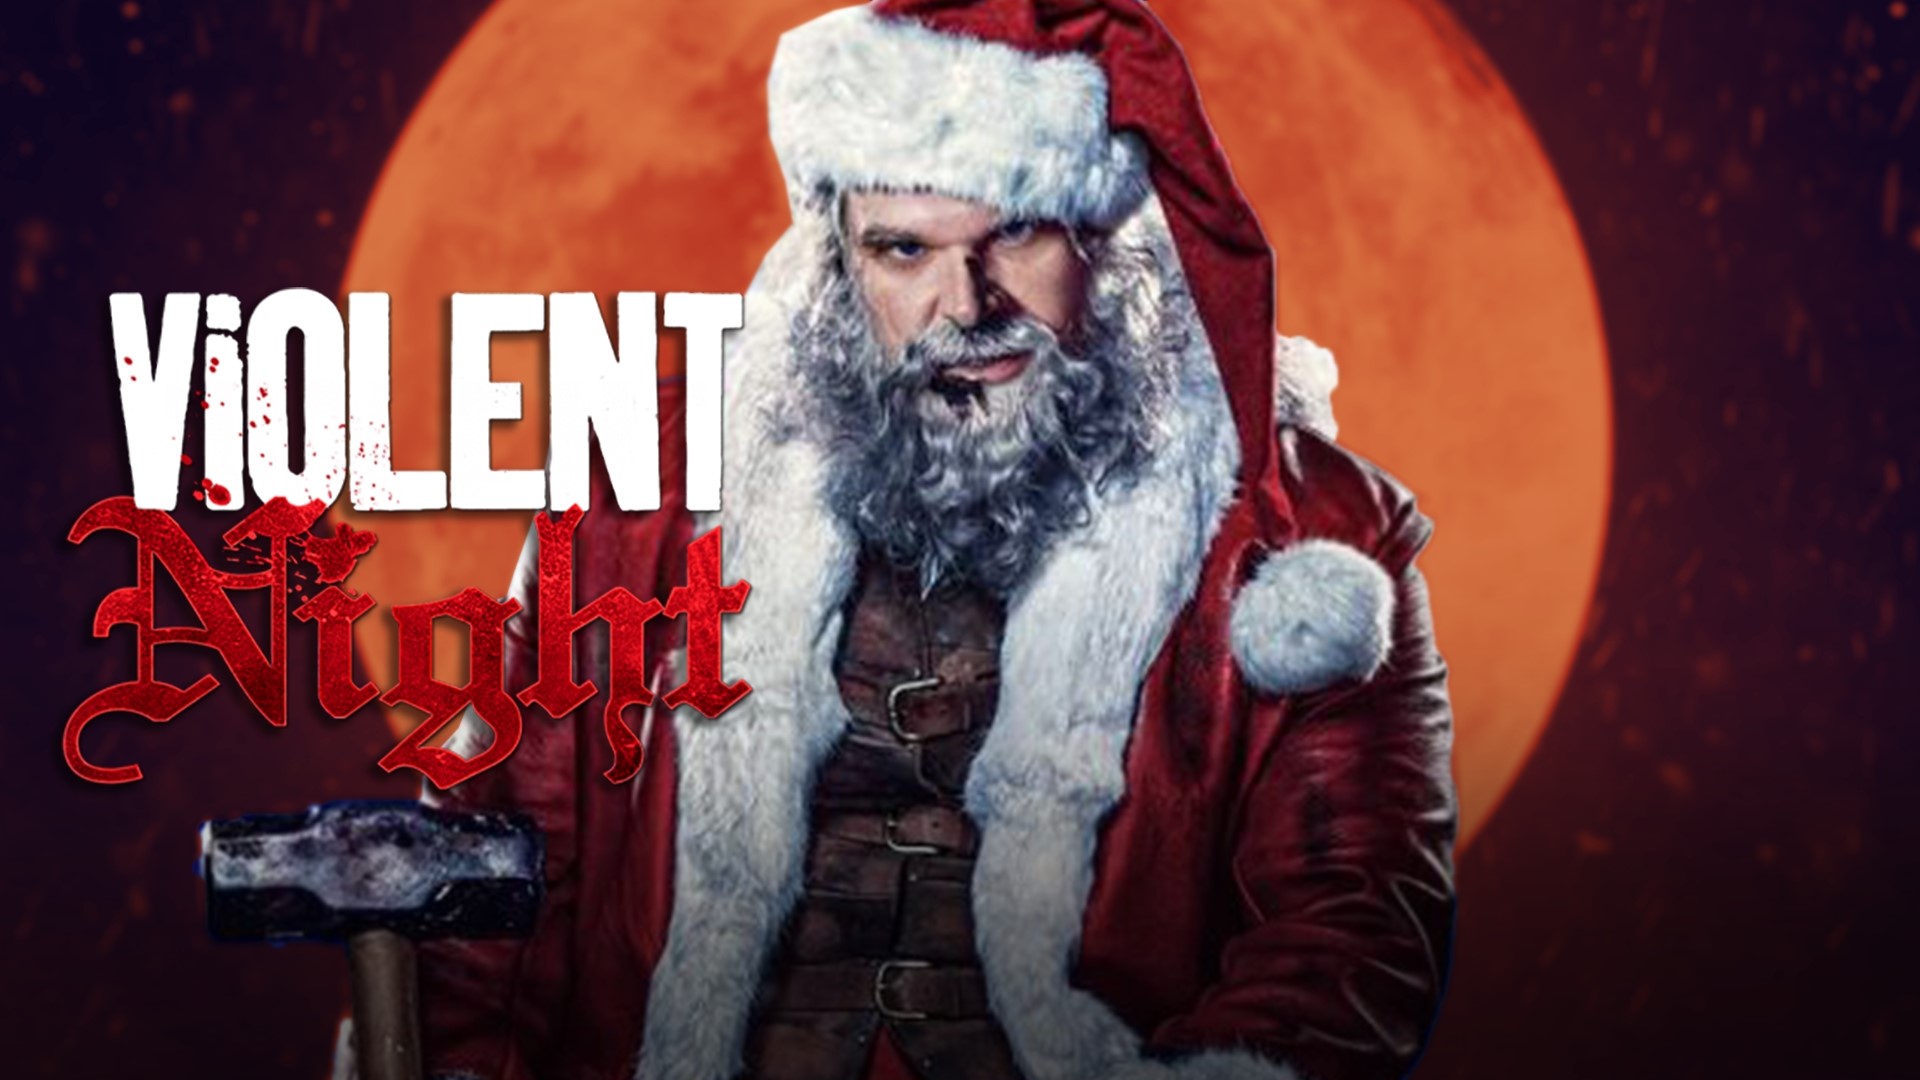 Violent Night, starring David Harbour, transforms Santa Claus into a Die Hard hero who saves the day which is more sentimental thank you think.